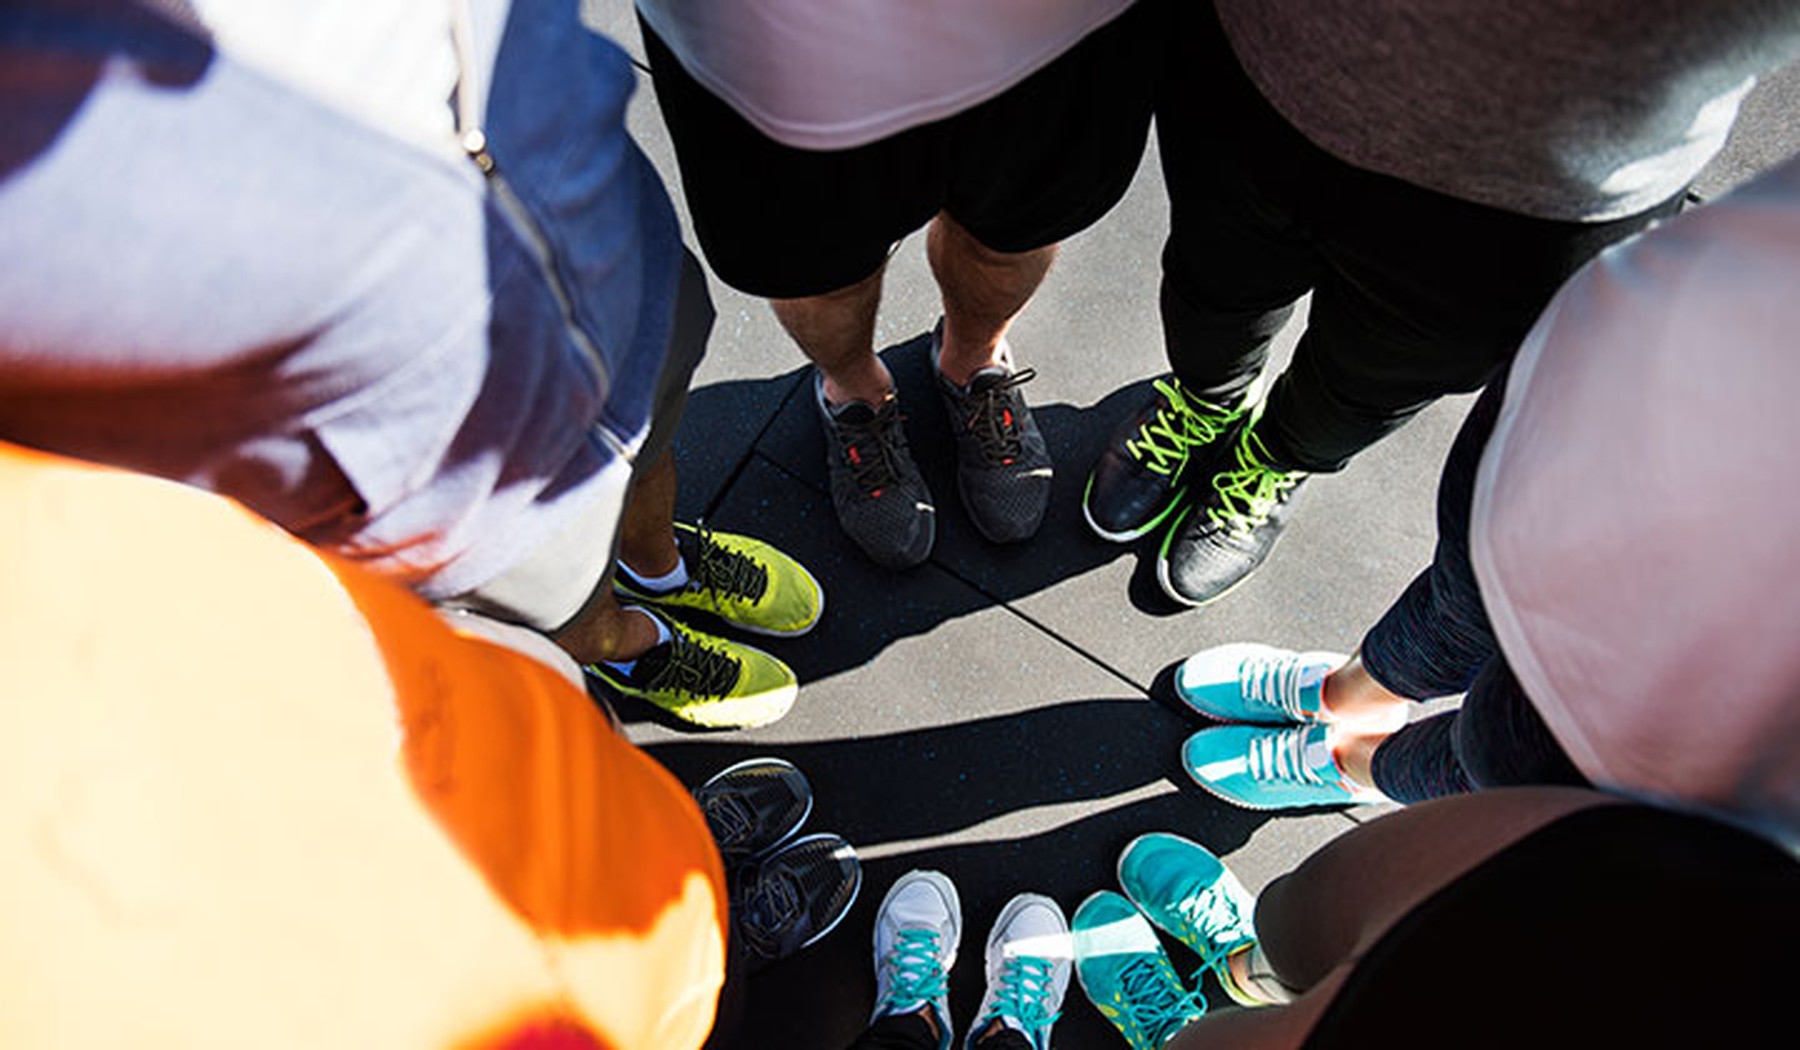 Group of people wearing athletic shoes